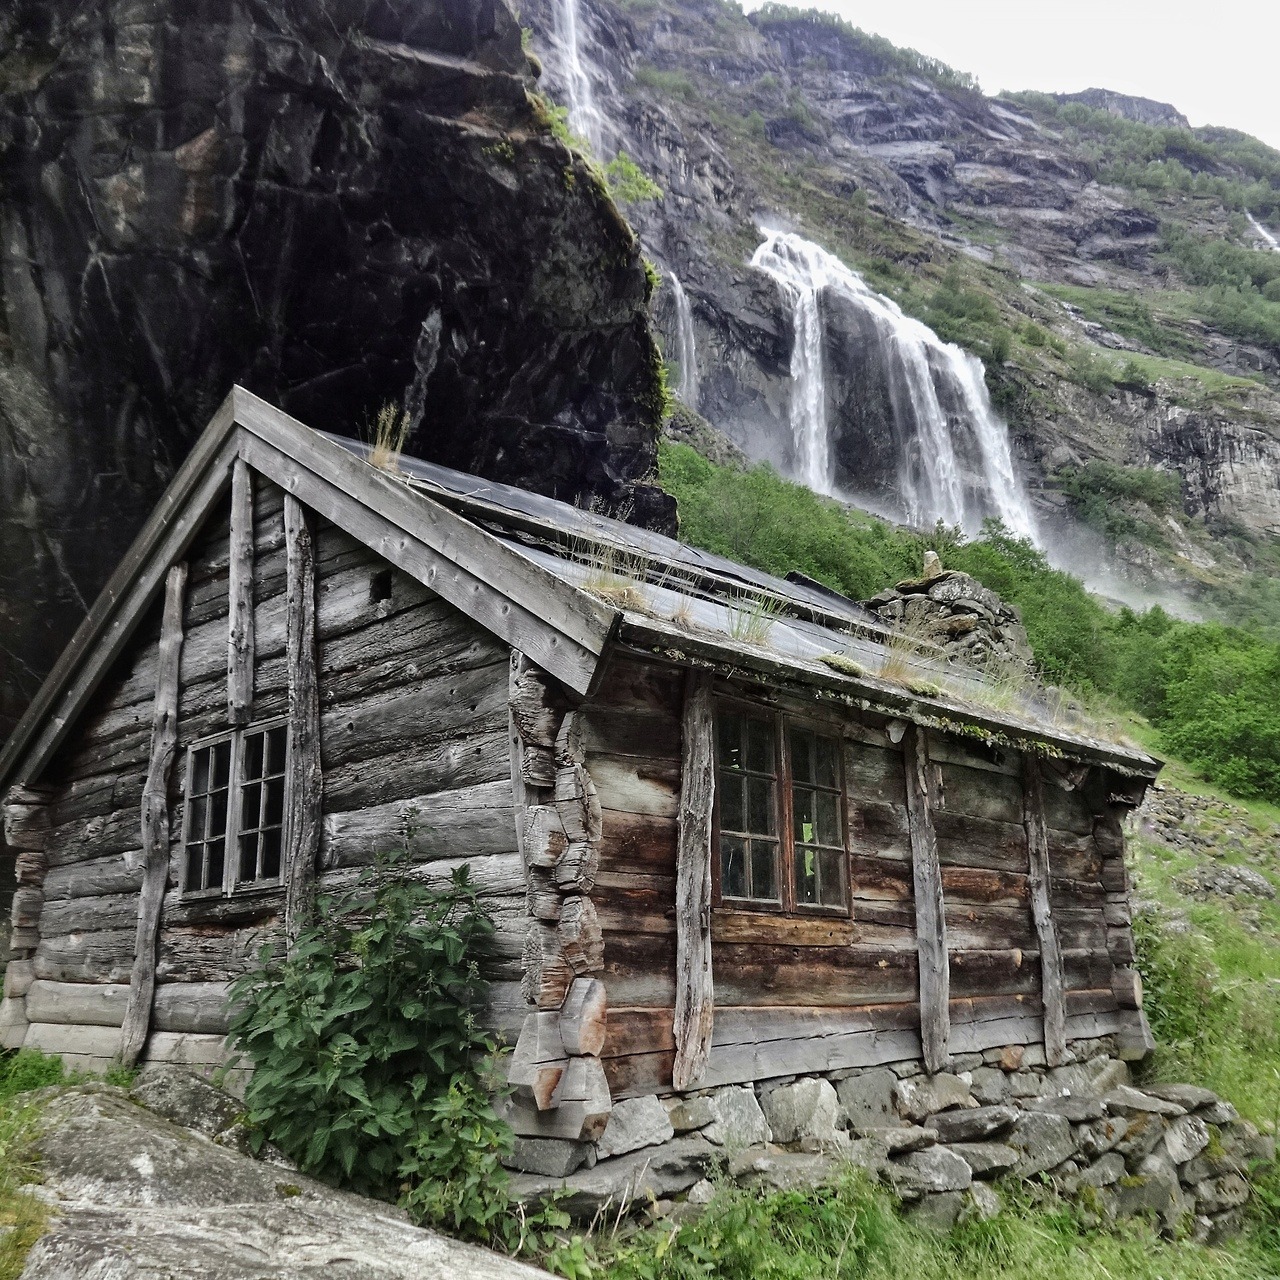 Aurlandsdalen, Norway
Submitted by Yngwie Scheerlinck / @yngwie_traveladdict
“I did a trekking from the Hardangervidda plate to the fjords and this cabin was located in a very remote gorge full of waterfalls from the surrounding glaciers who where...